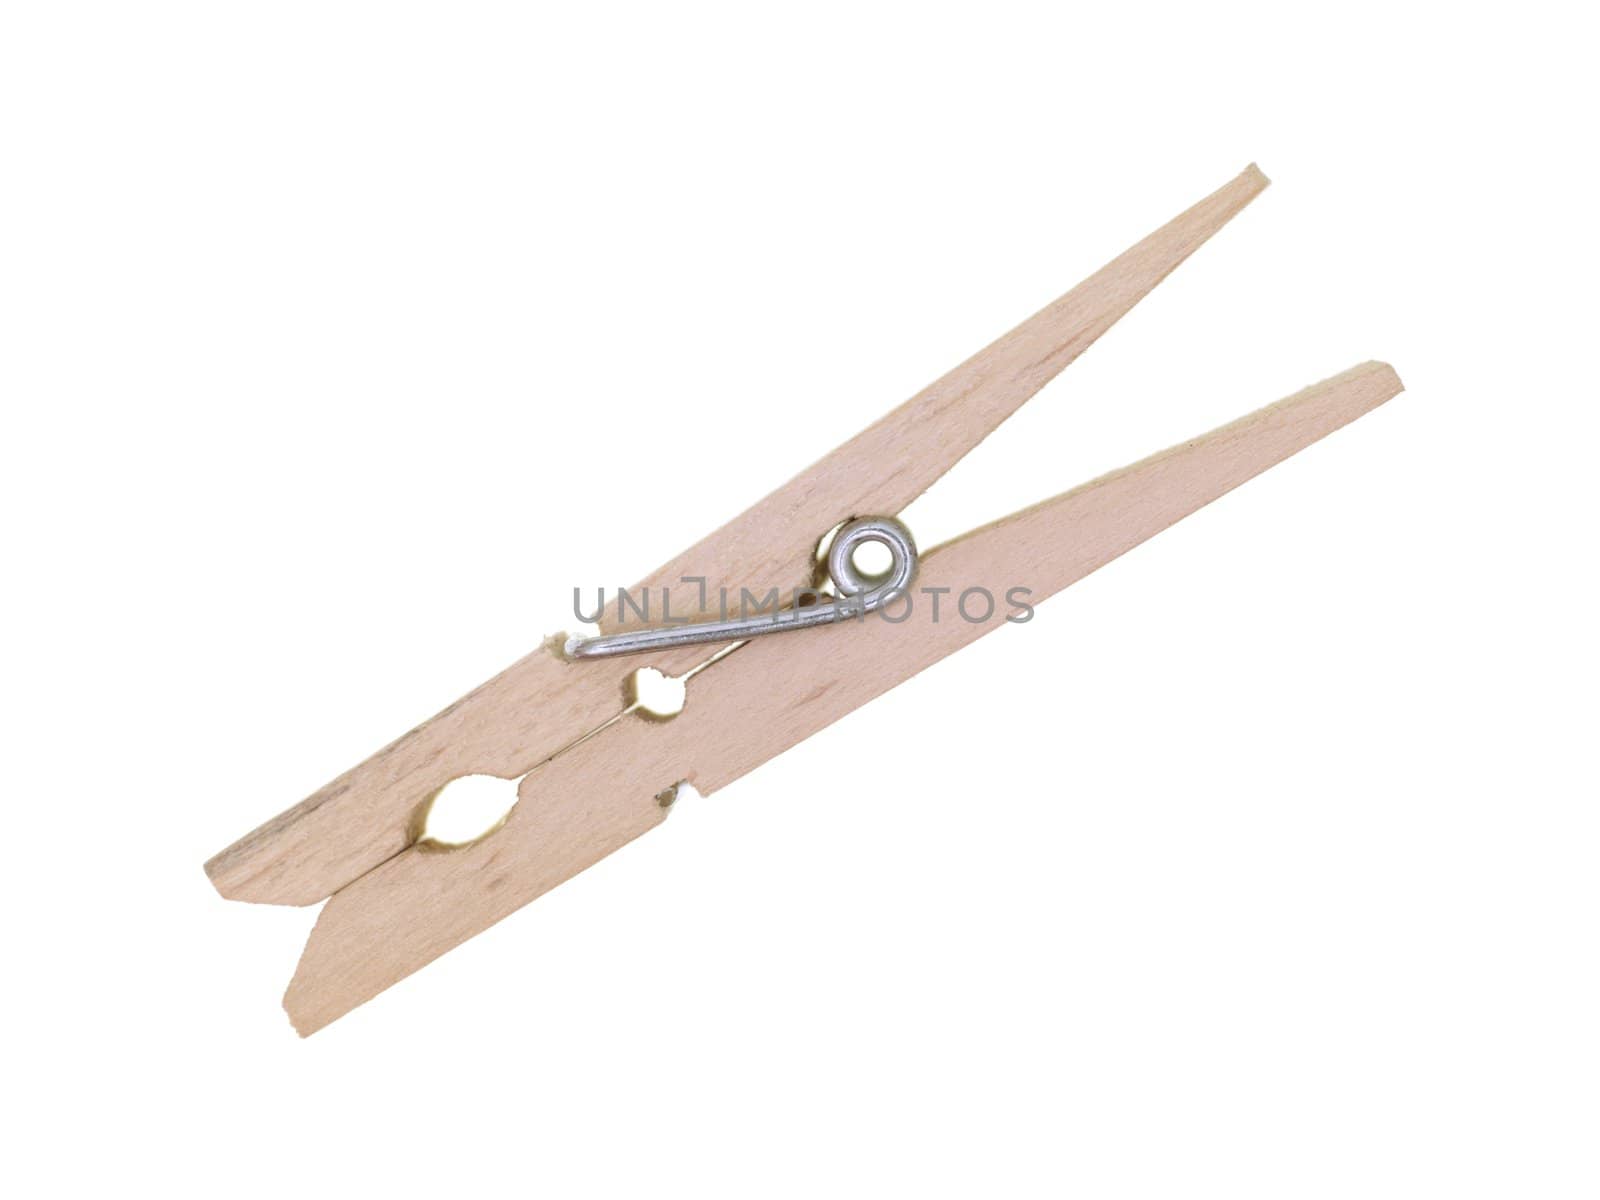 A wooden peg isolated against a white background